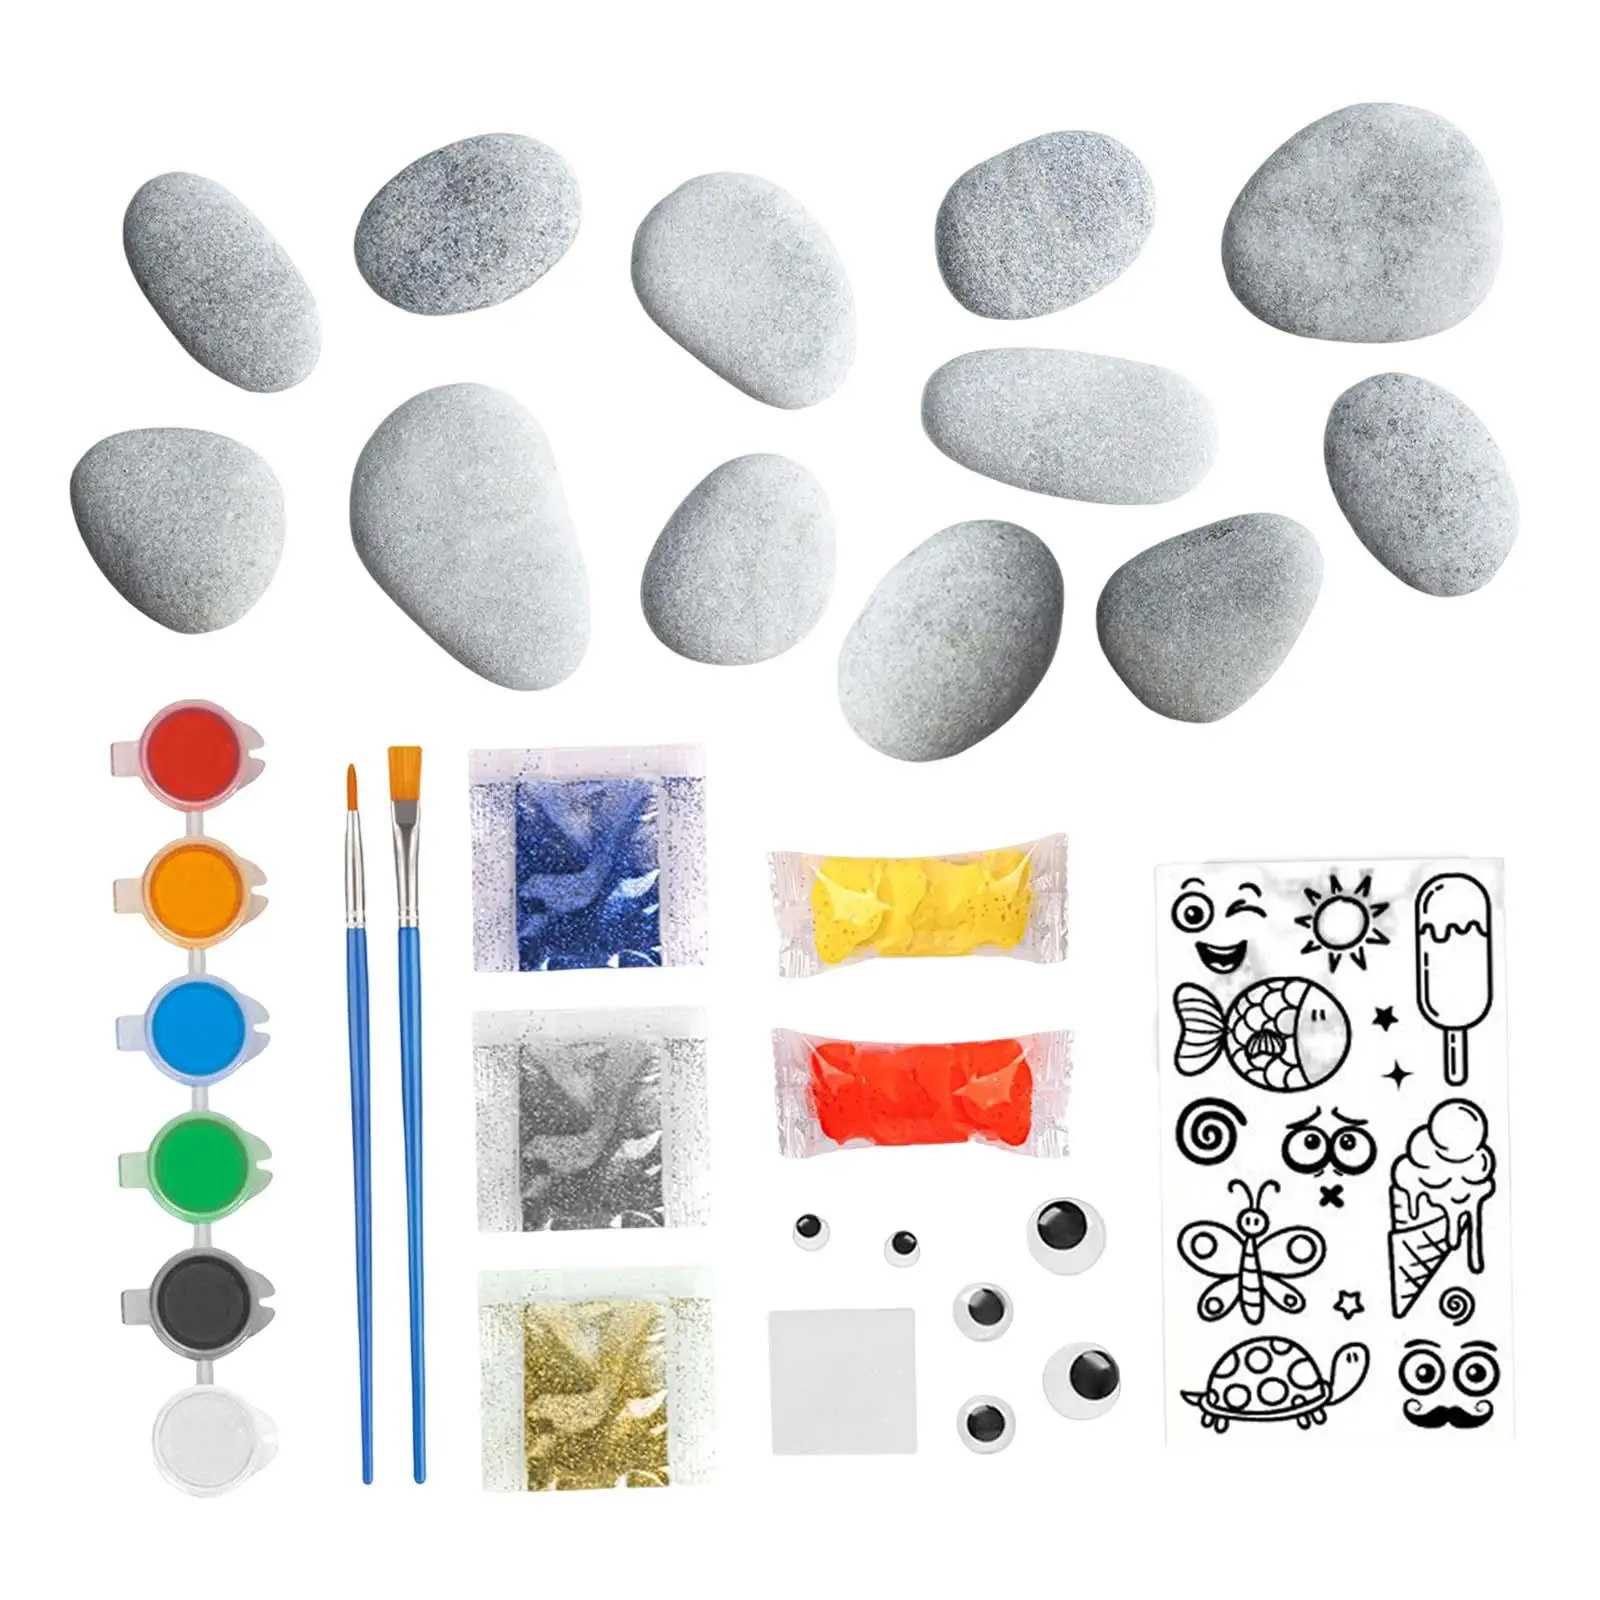 Rock Painting Outdoor Activity Kit Waterproof Arts and Crafts art Painting Set for Outdoor Birthday Girl